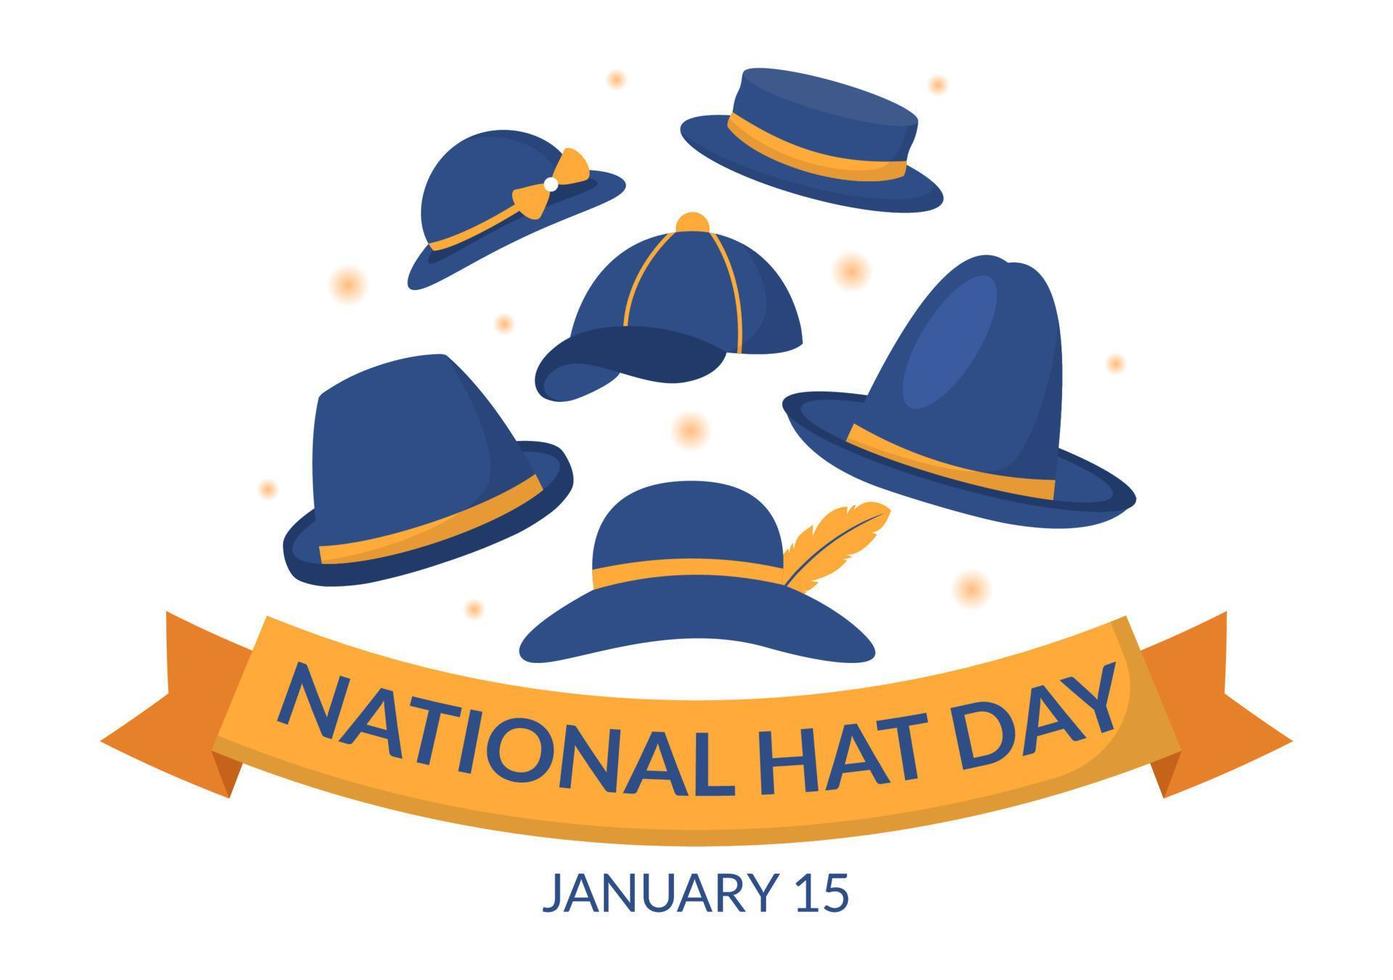 National Hat Day Celebrated Each Year on January 15th with Fedora Hats, Cap, Cloche or Derby in Flat Cartoon Hand Drawn Templates Illustration vector